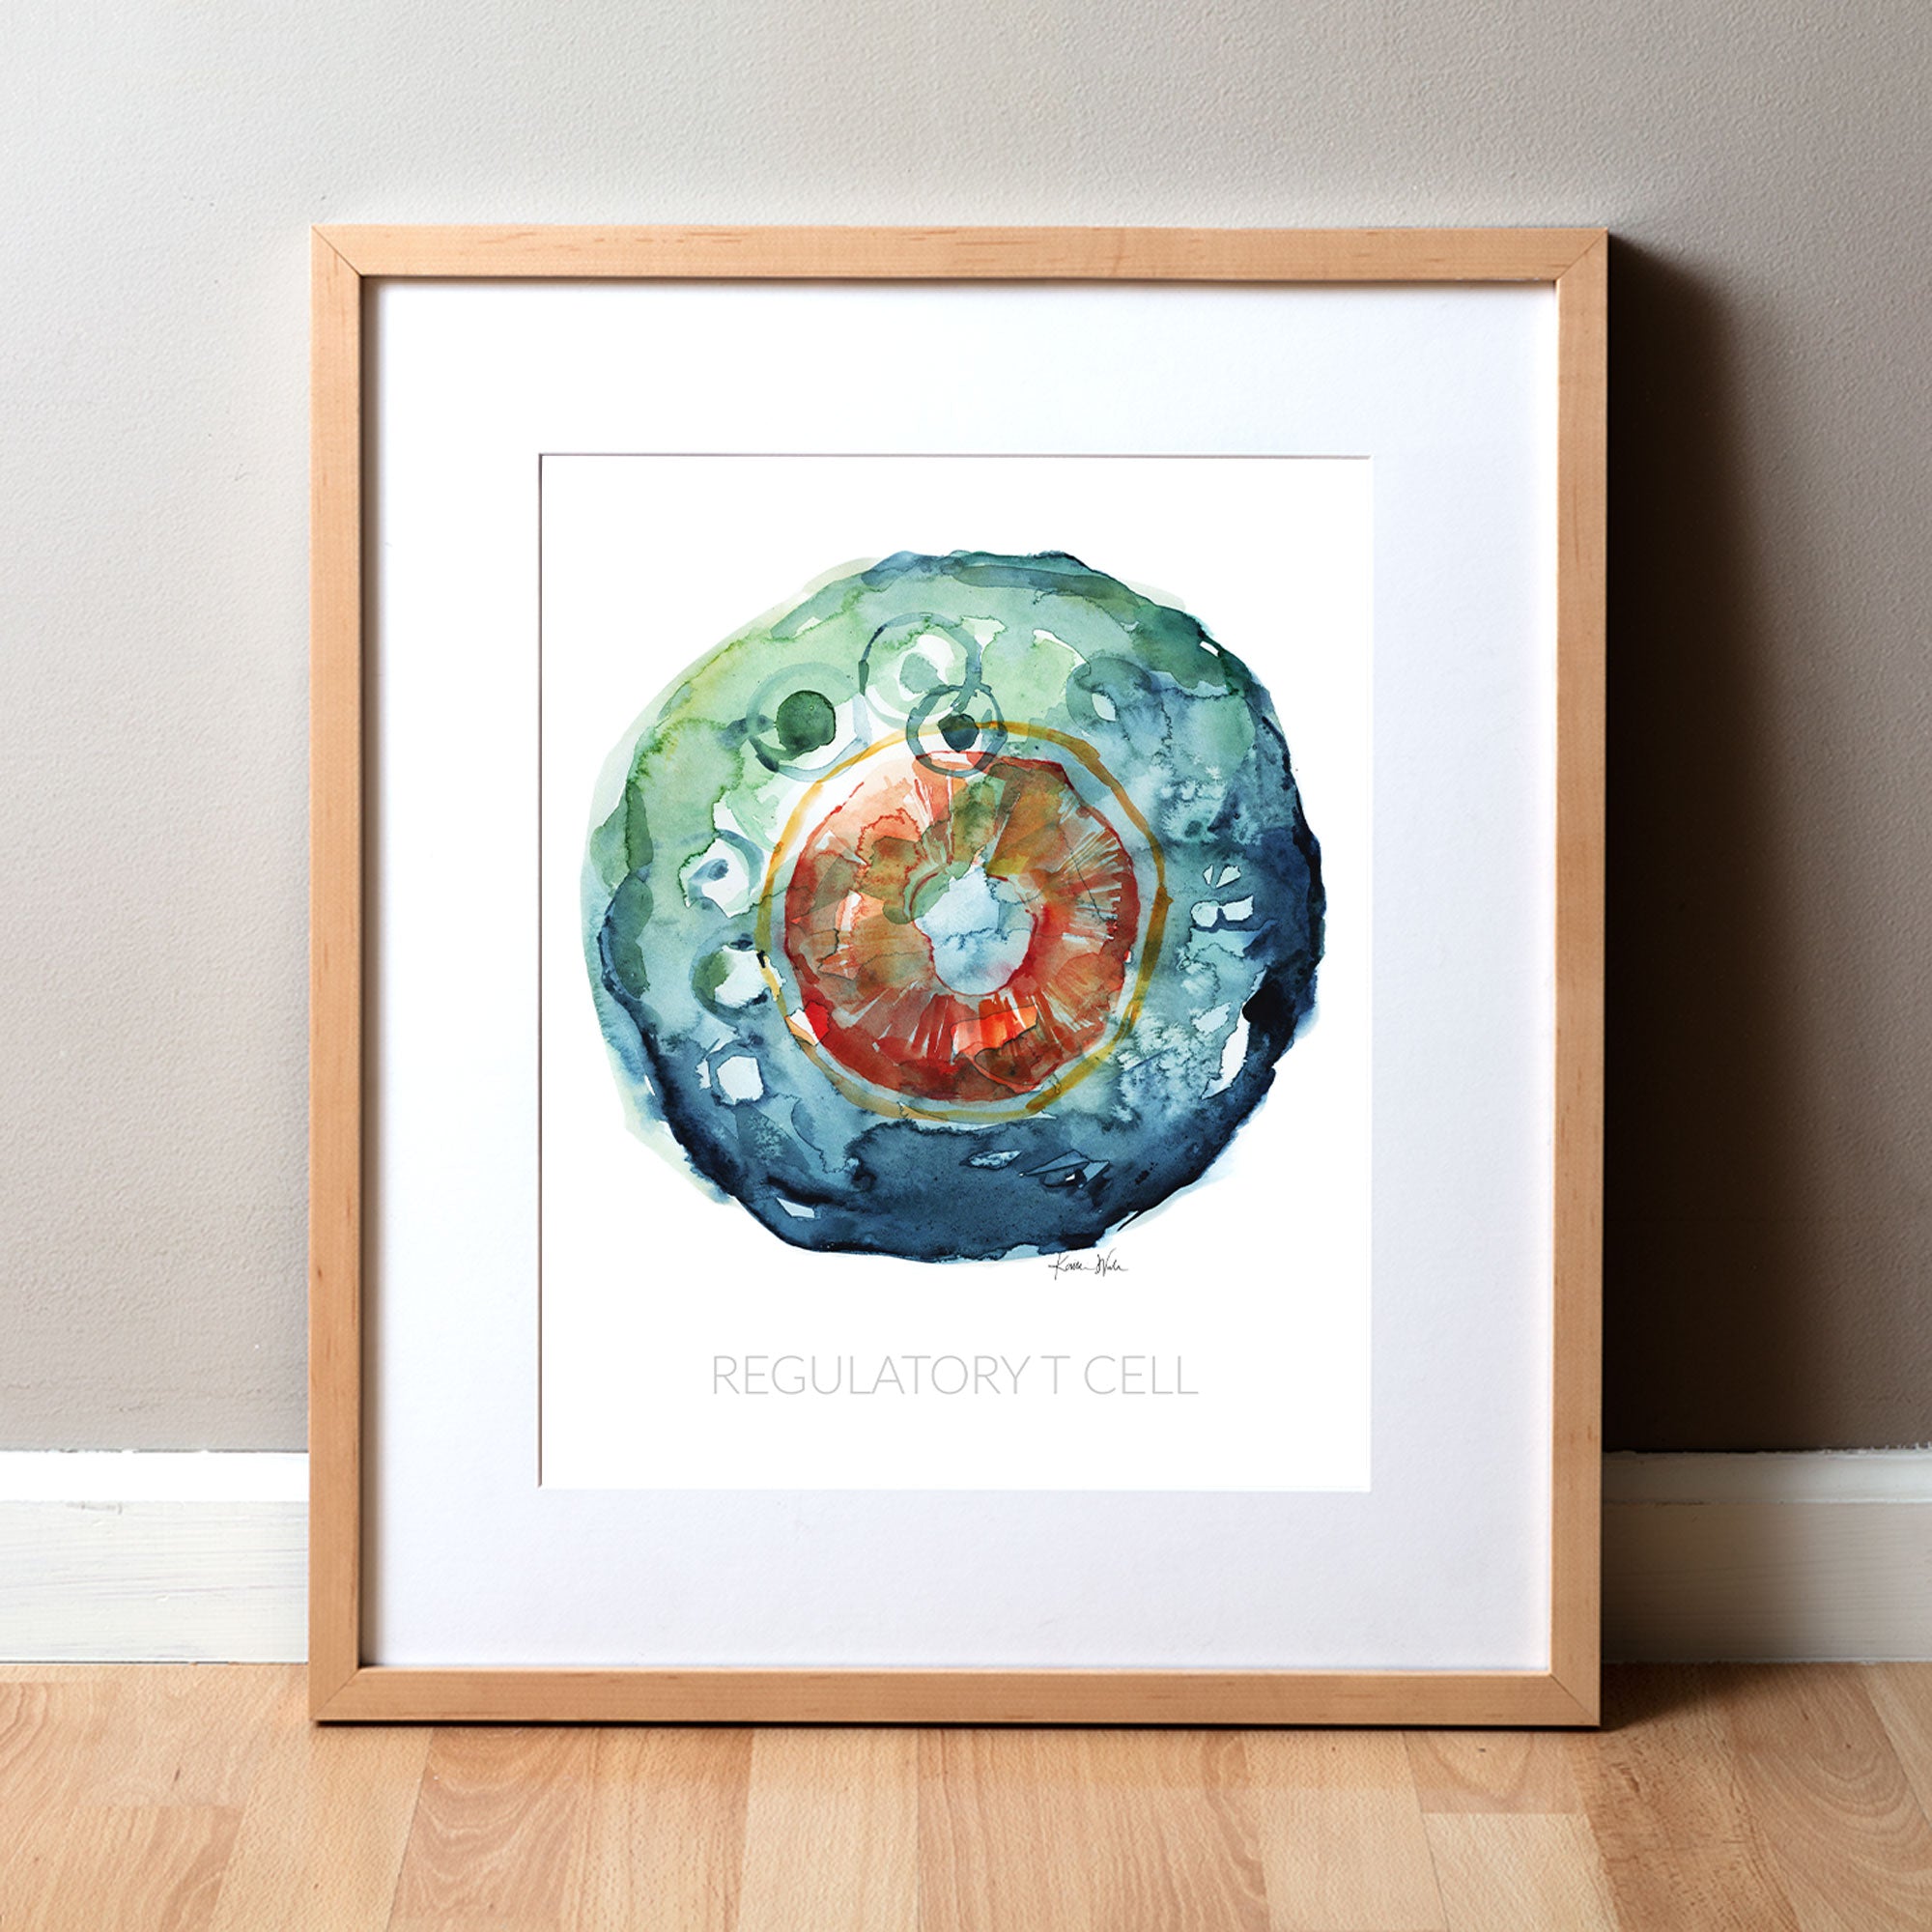 Framed watercolor painting of a regulatory T cell.